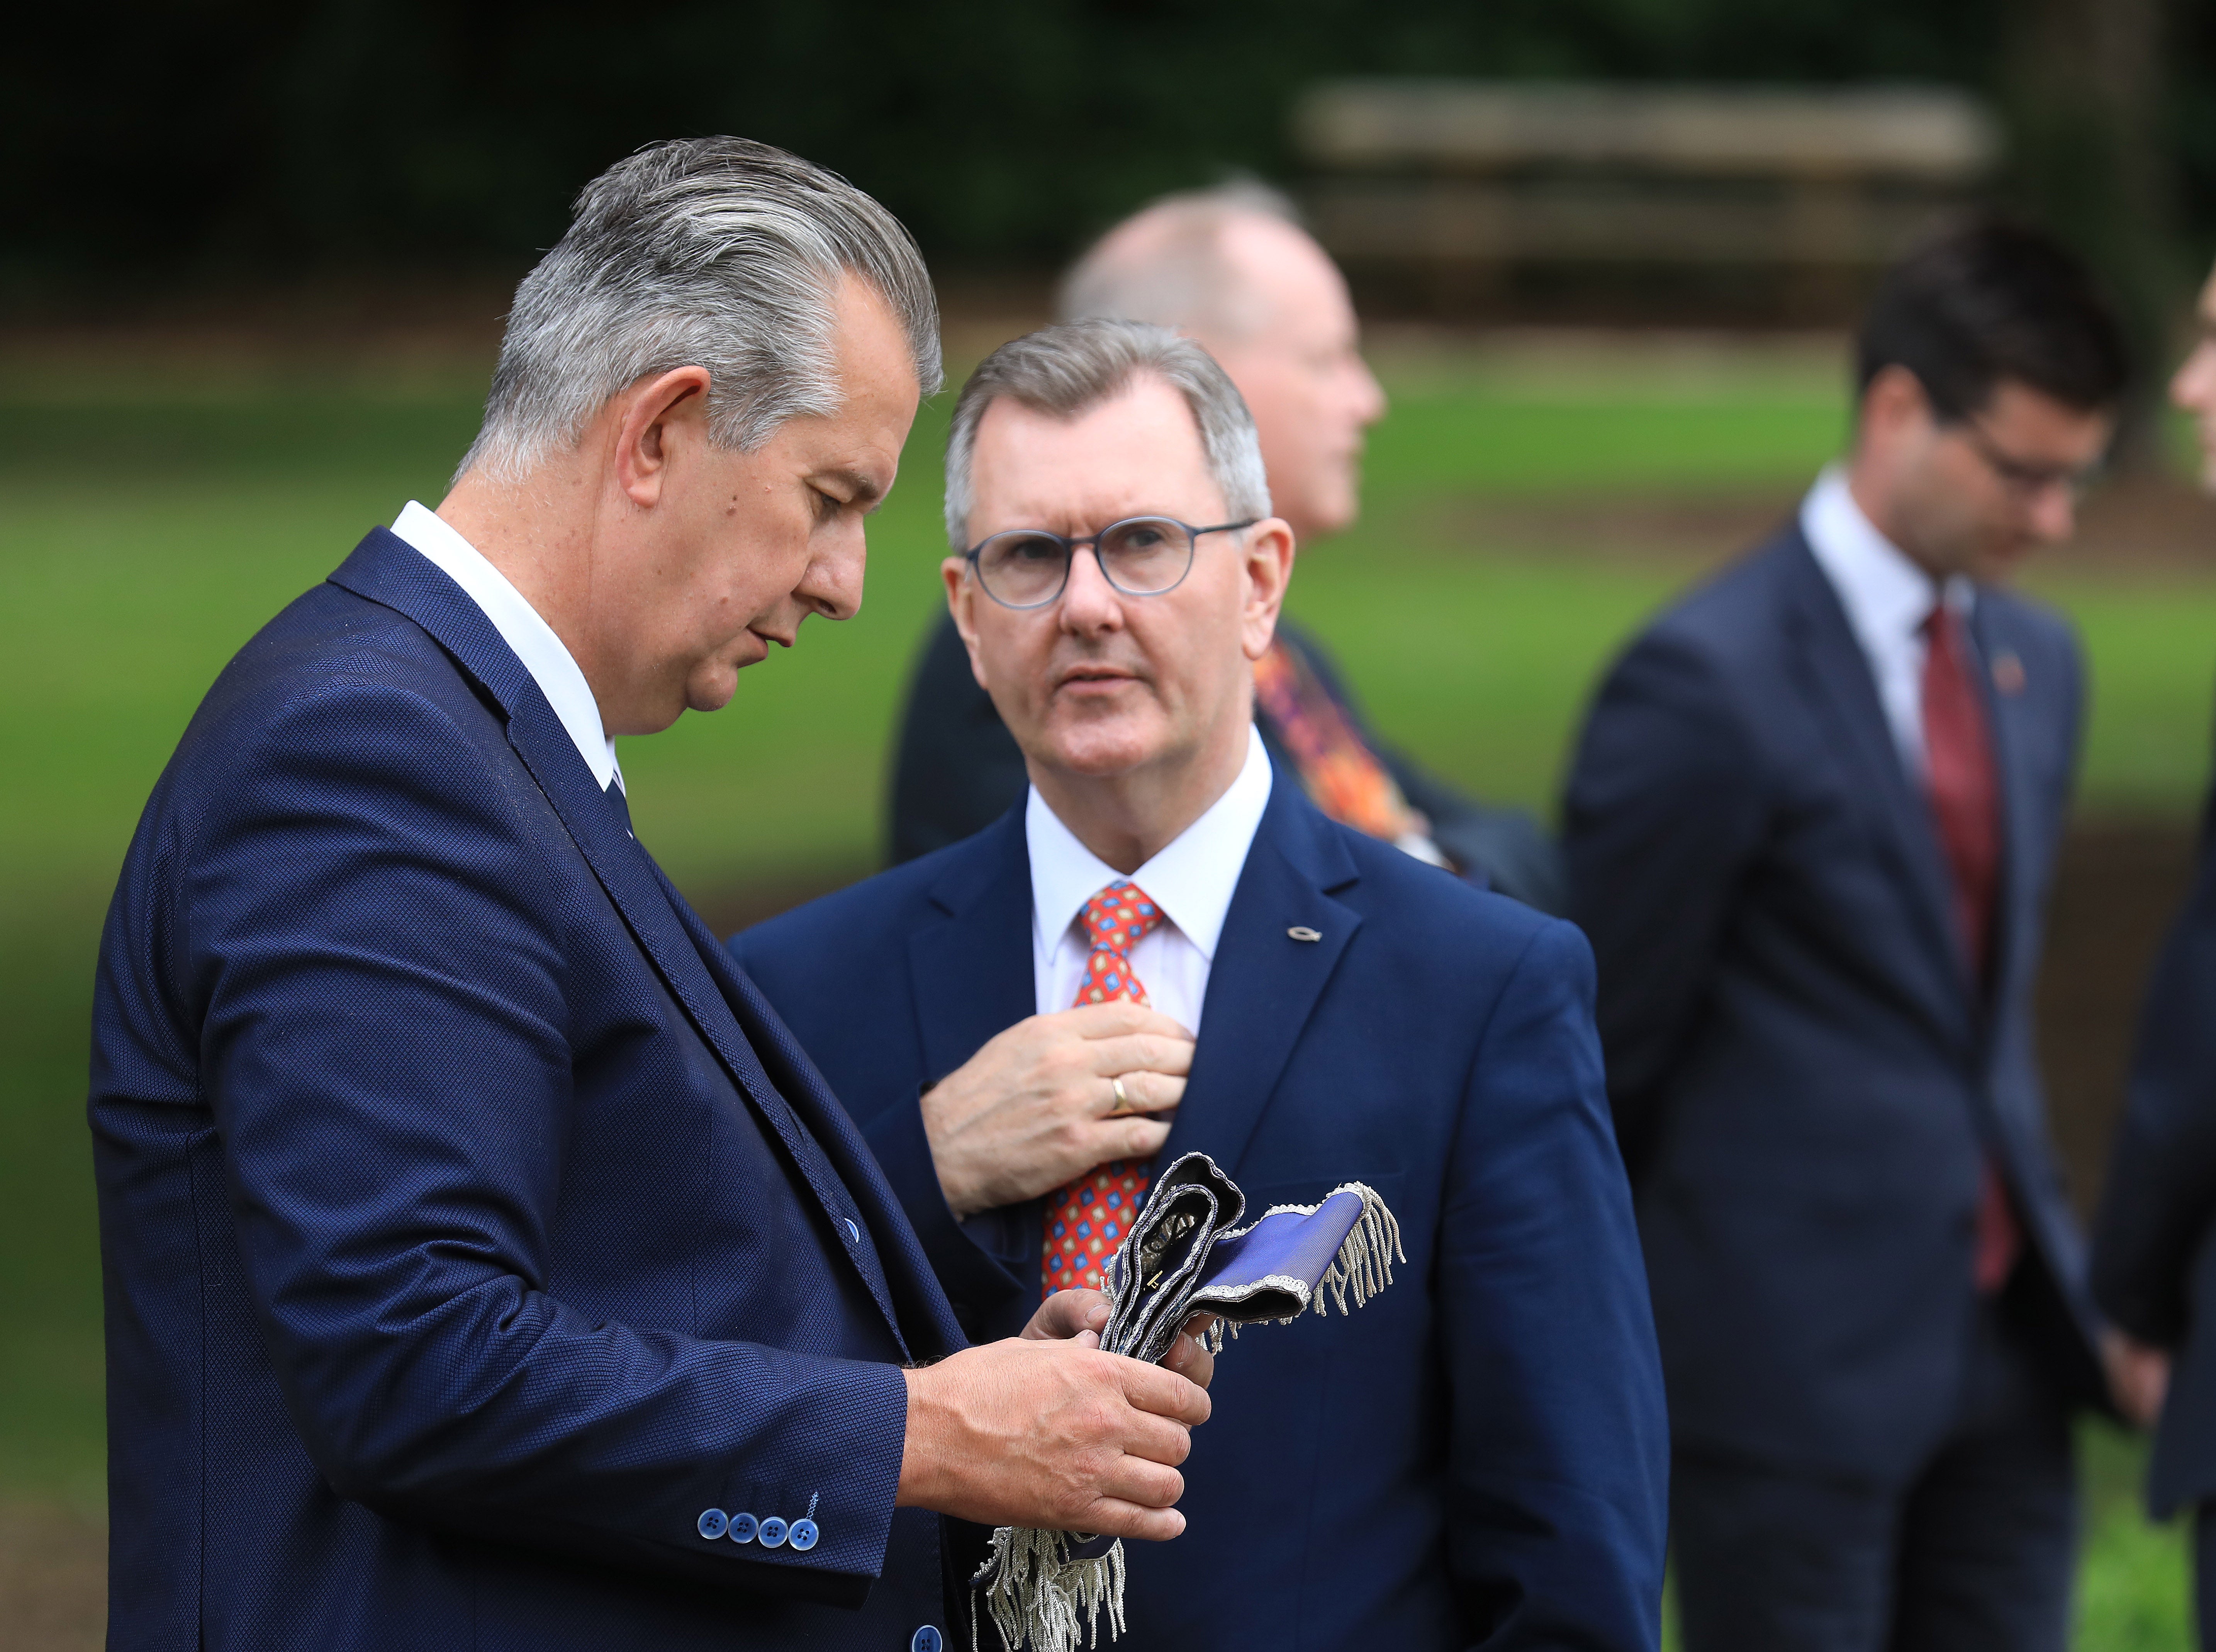 Edwin Poots (left) with newly elected DUP leader Sir Jeffrey Donaldson during a Battle of the Somme commemoration at Stormont in July (Peter Morrison/PA)